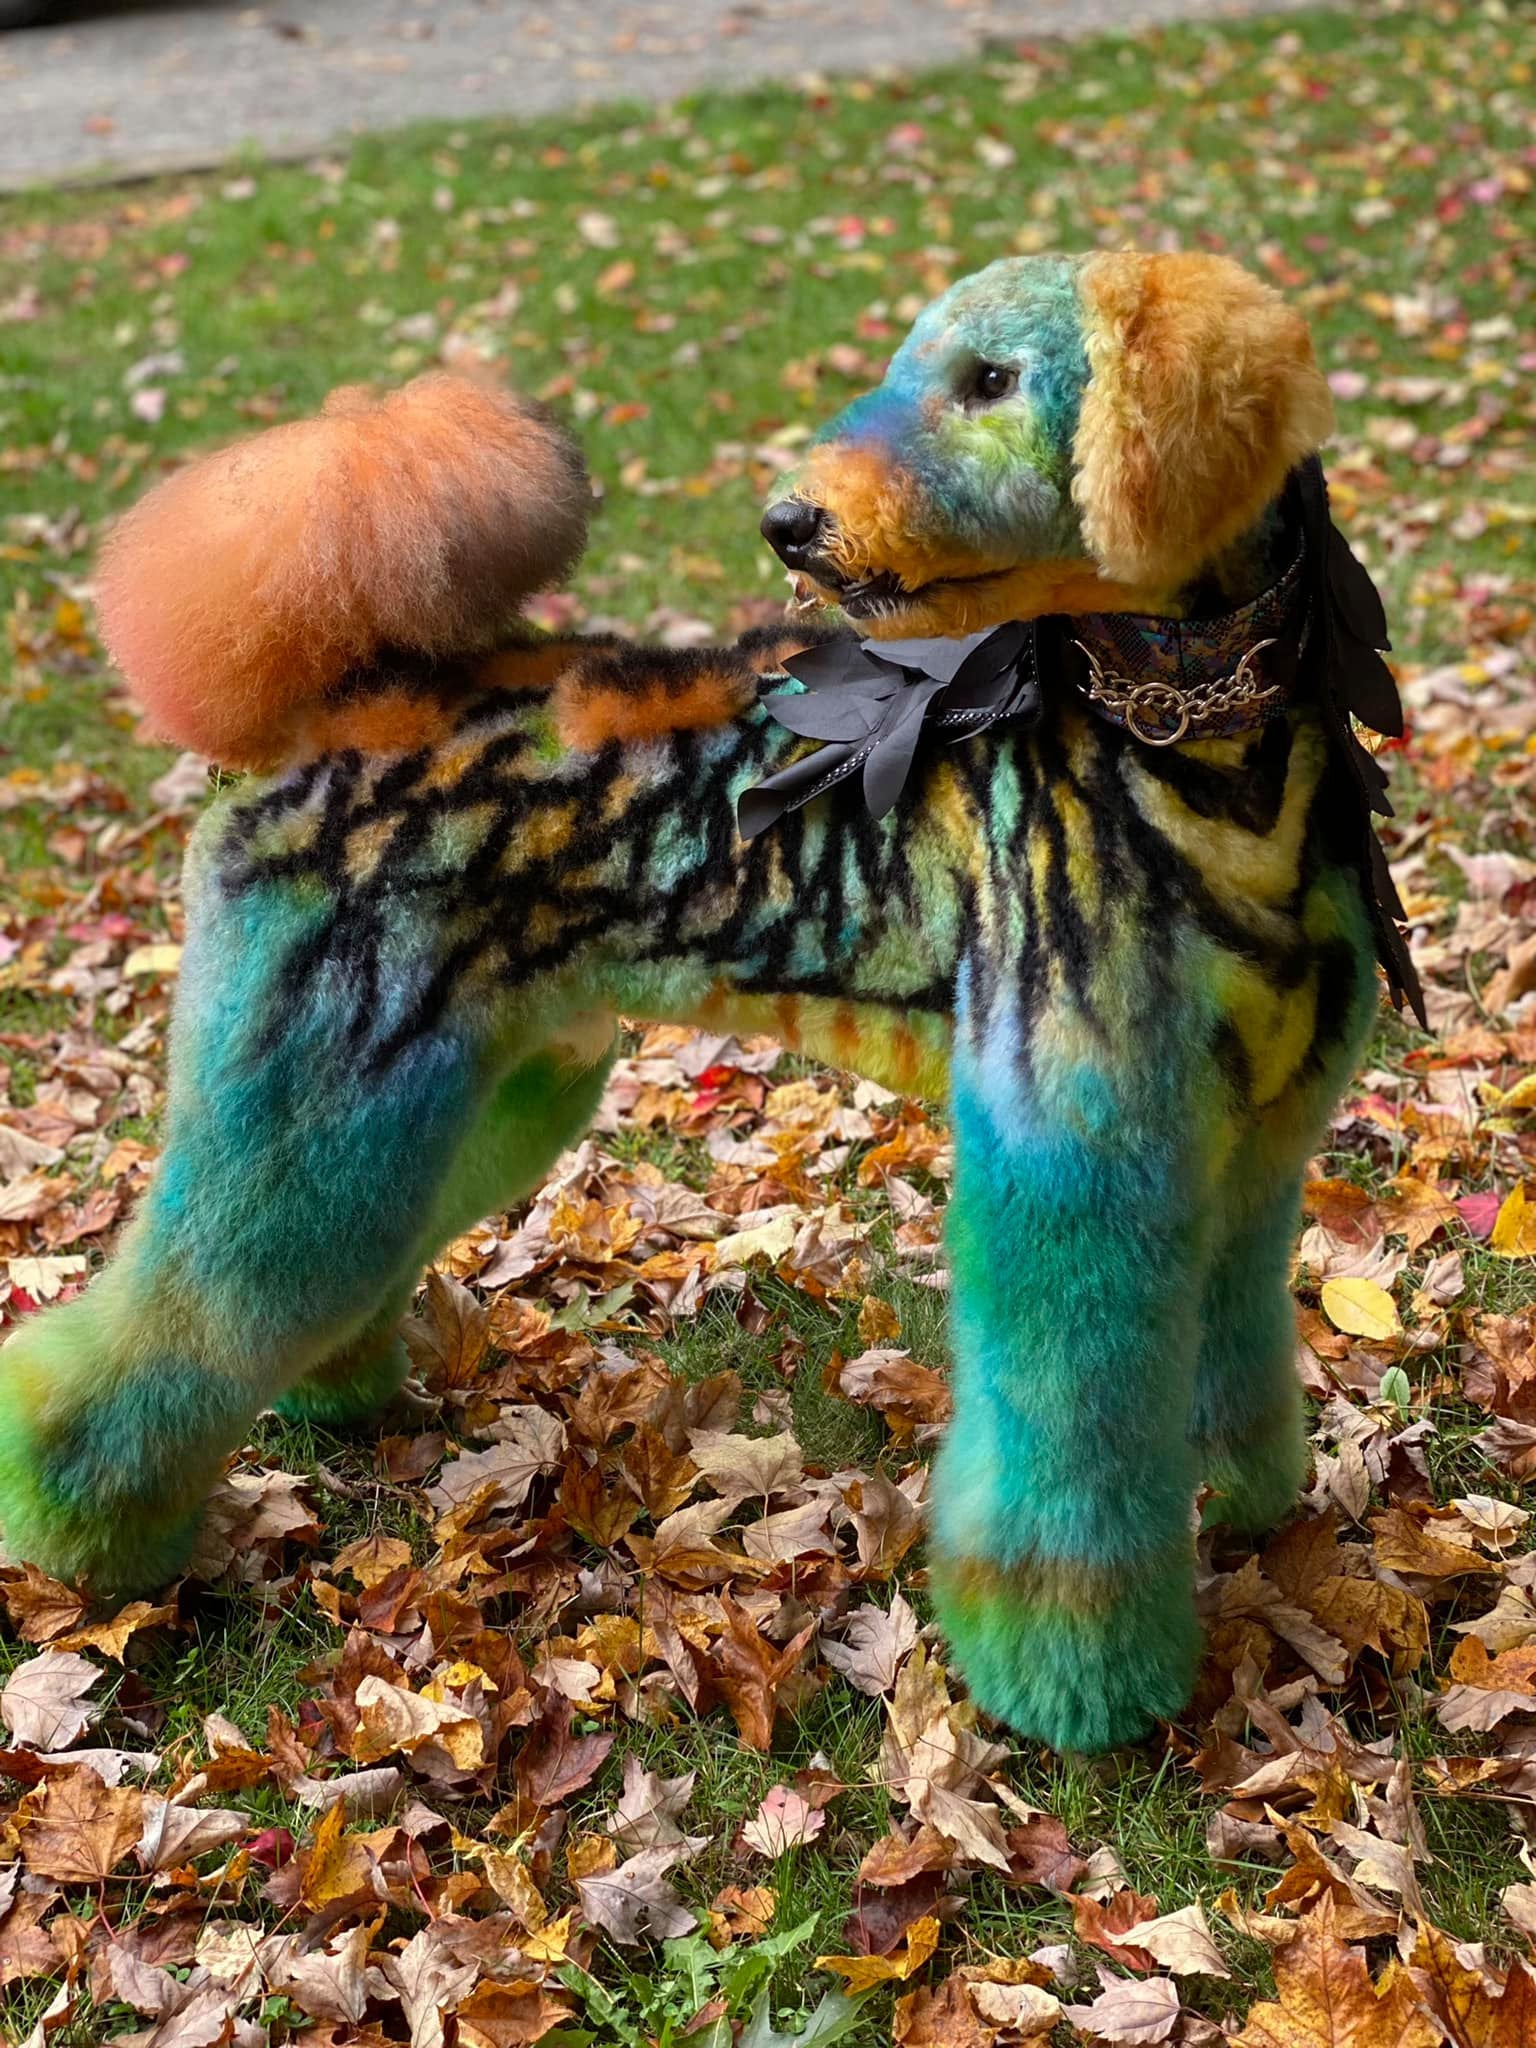 safe pet dye for creative dog grooming contest